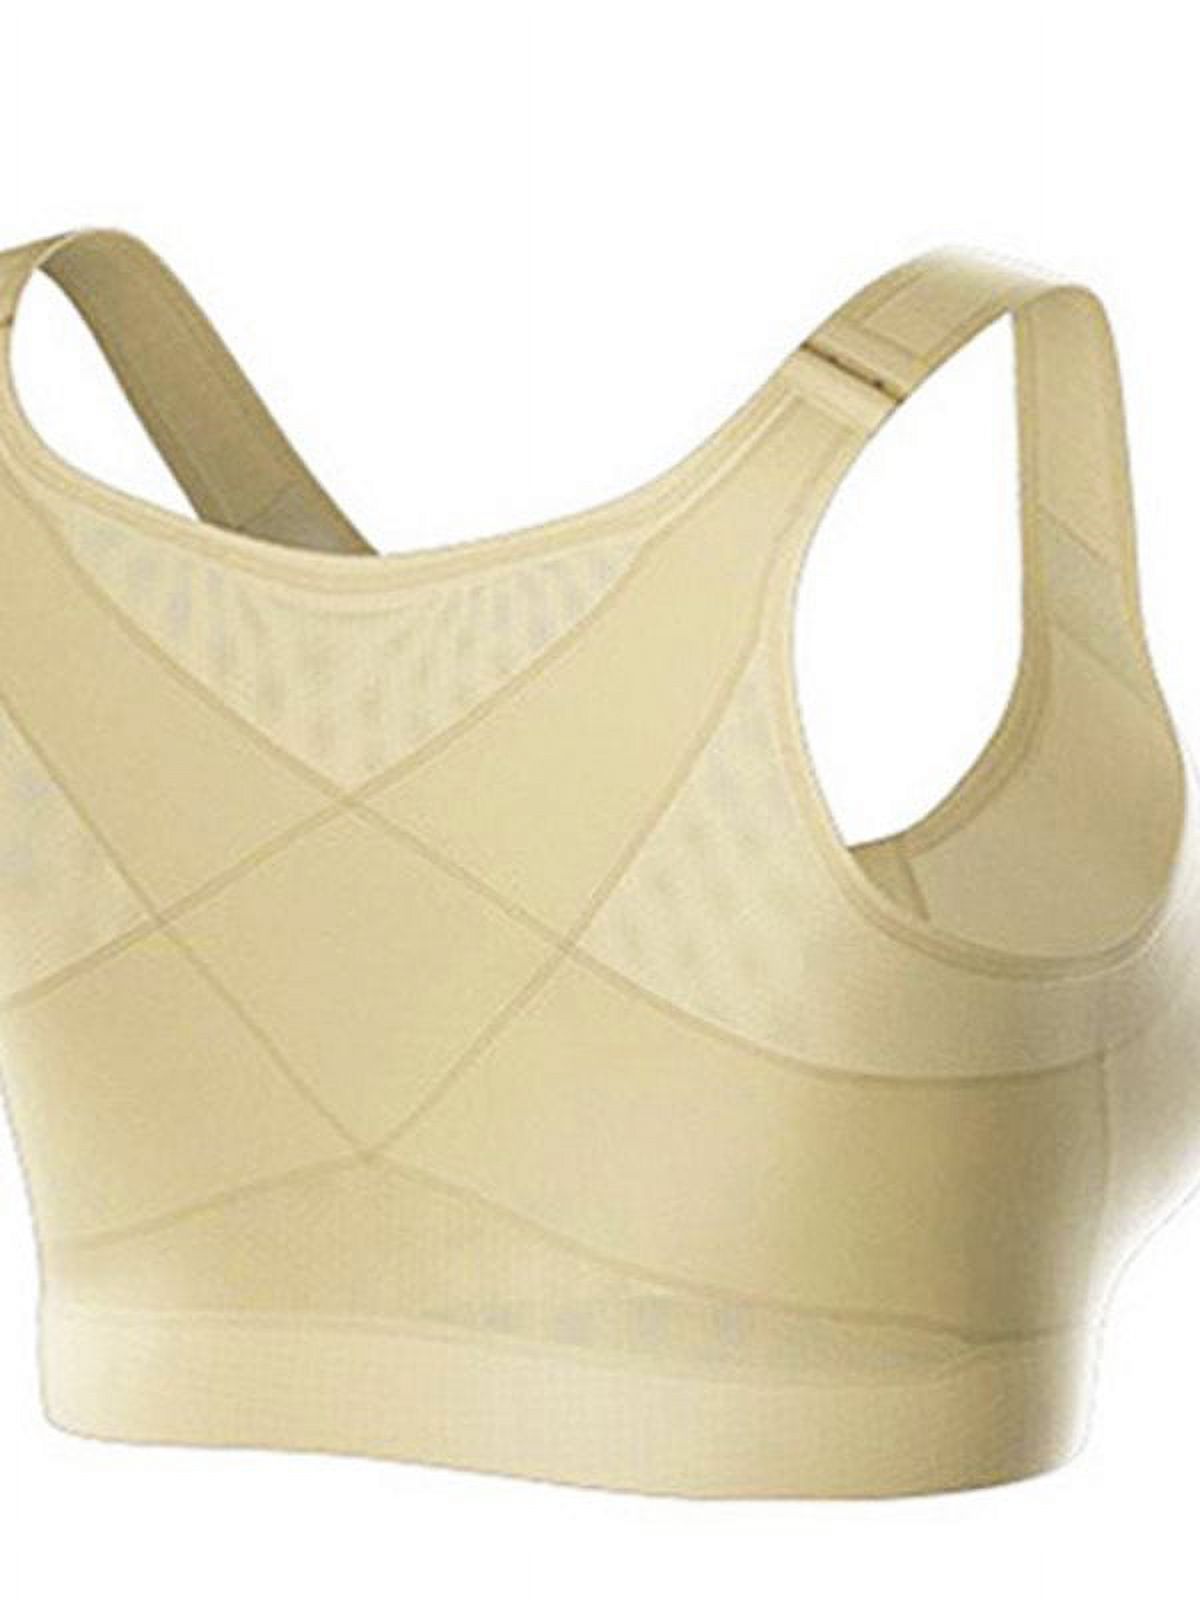 Women's Full Figure No Bounce Plus Size Camisole Wirefree Back Close Sports Bra - image 4 of 4